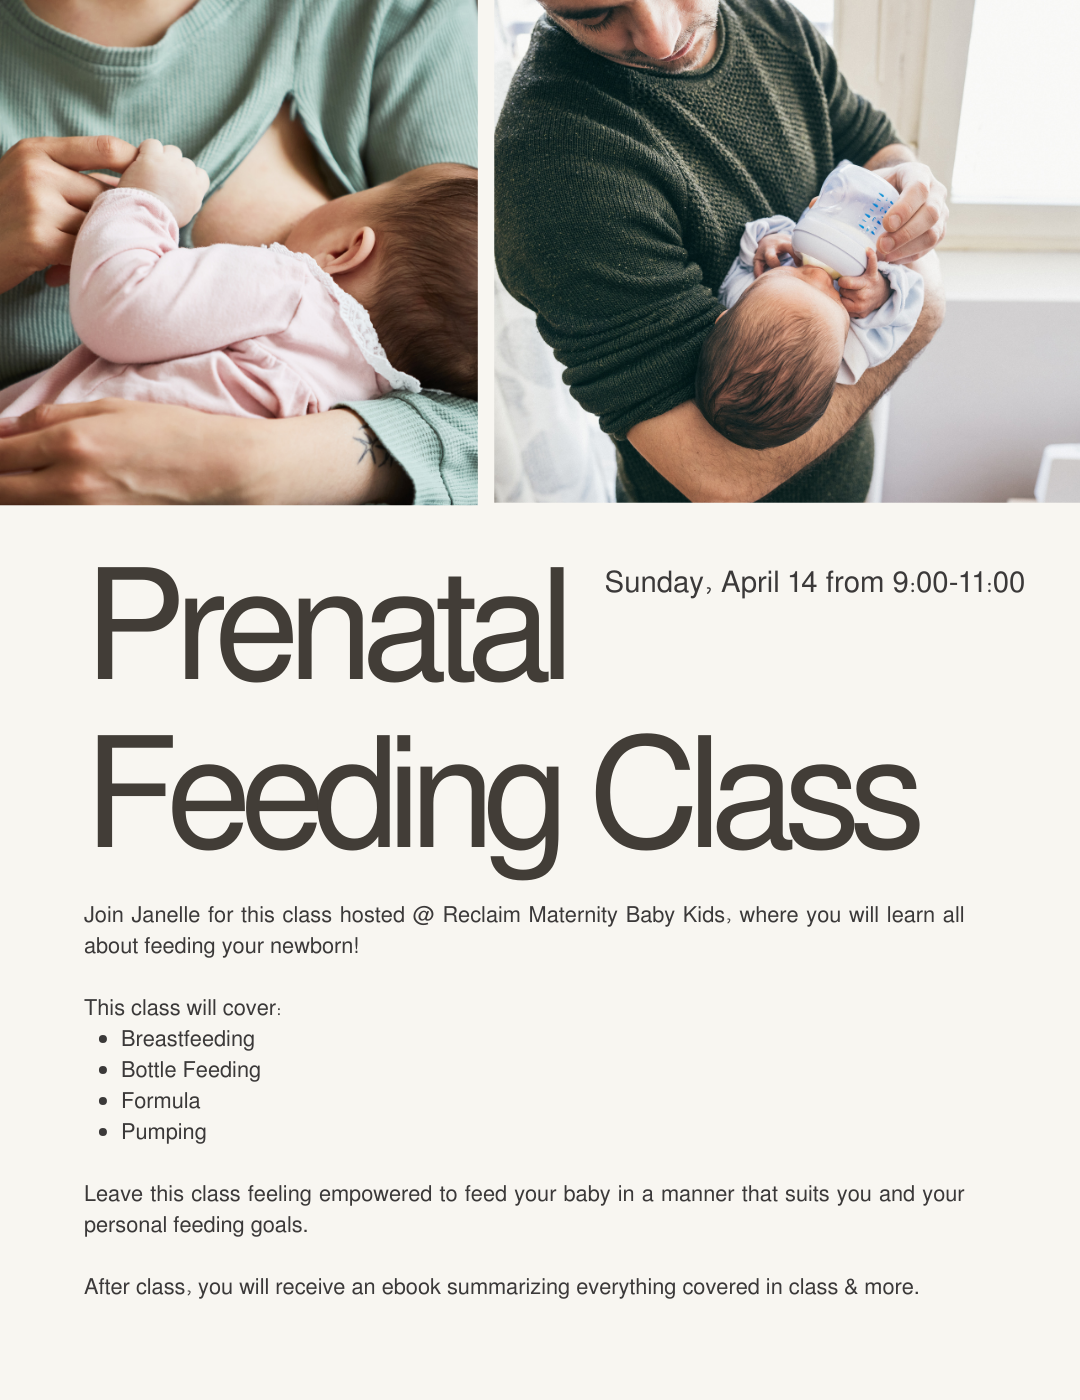 Prenatal Education Class Hosted by Janelle Turk - The Mama Coach